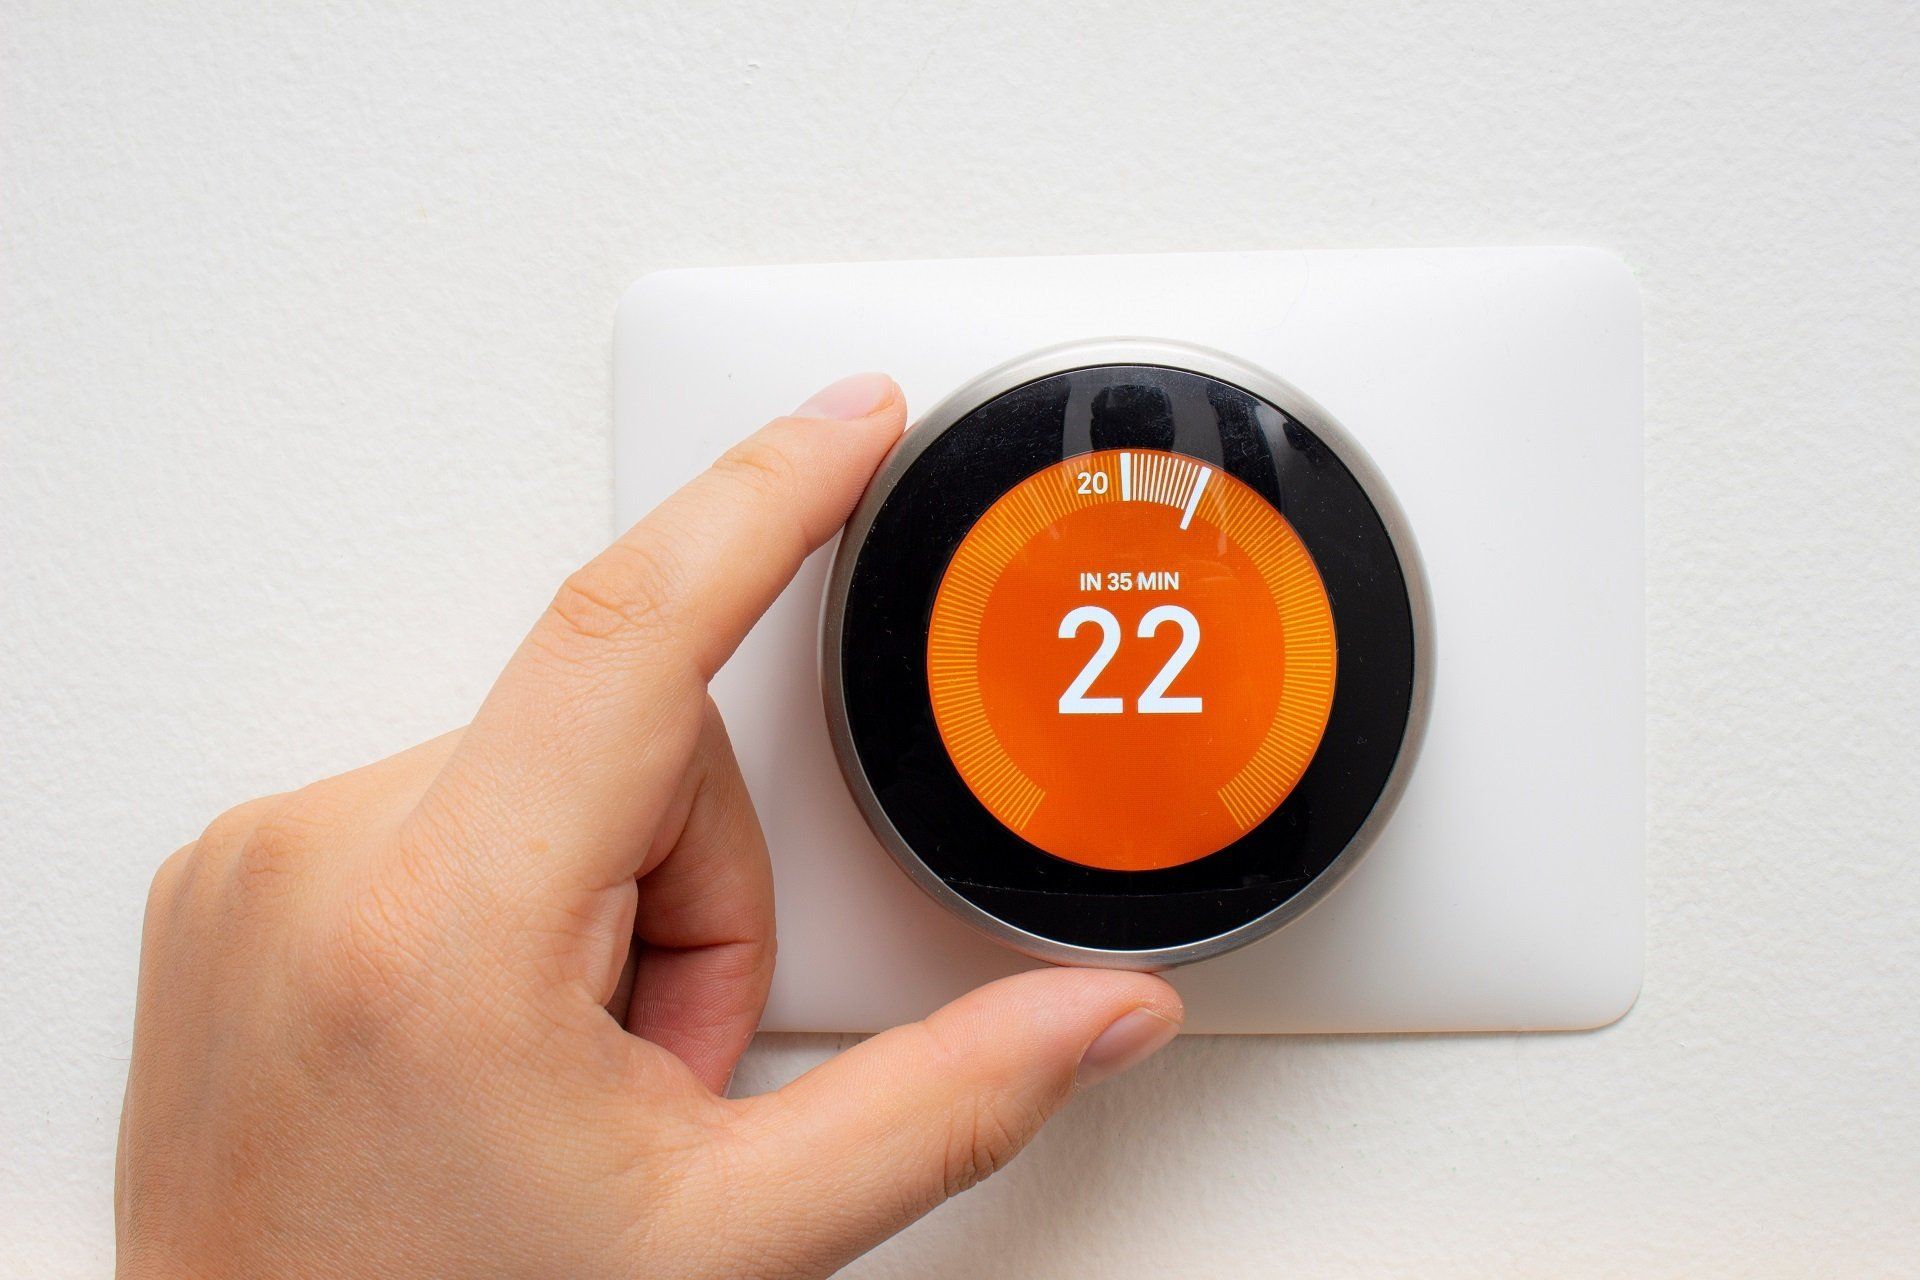 Want to Upgrade to the Nest Smart Thermostat? - Aztil Air Conditioning